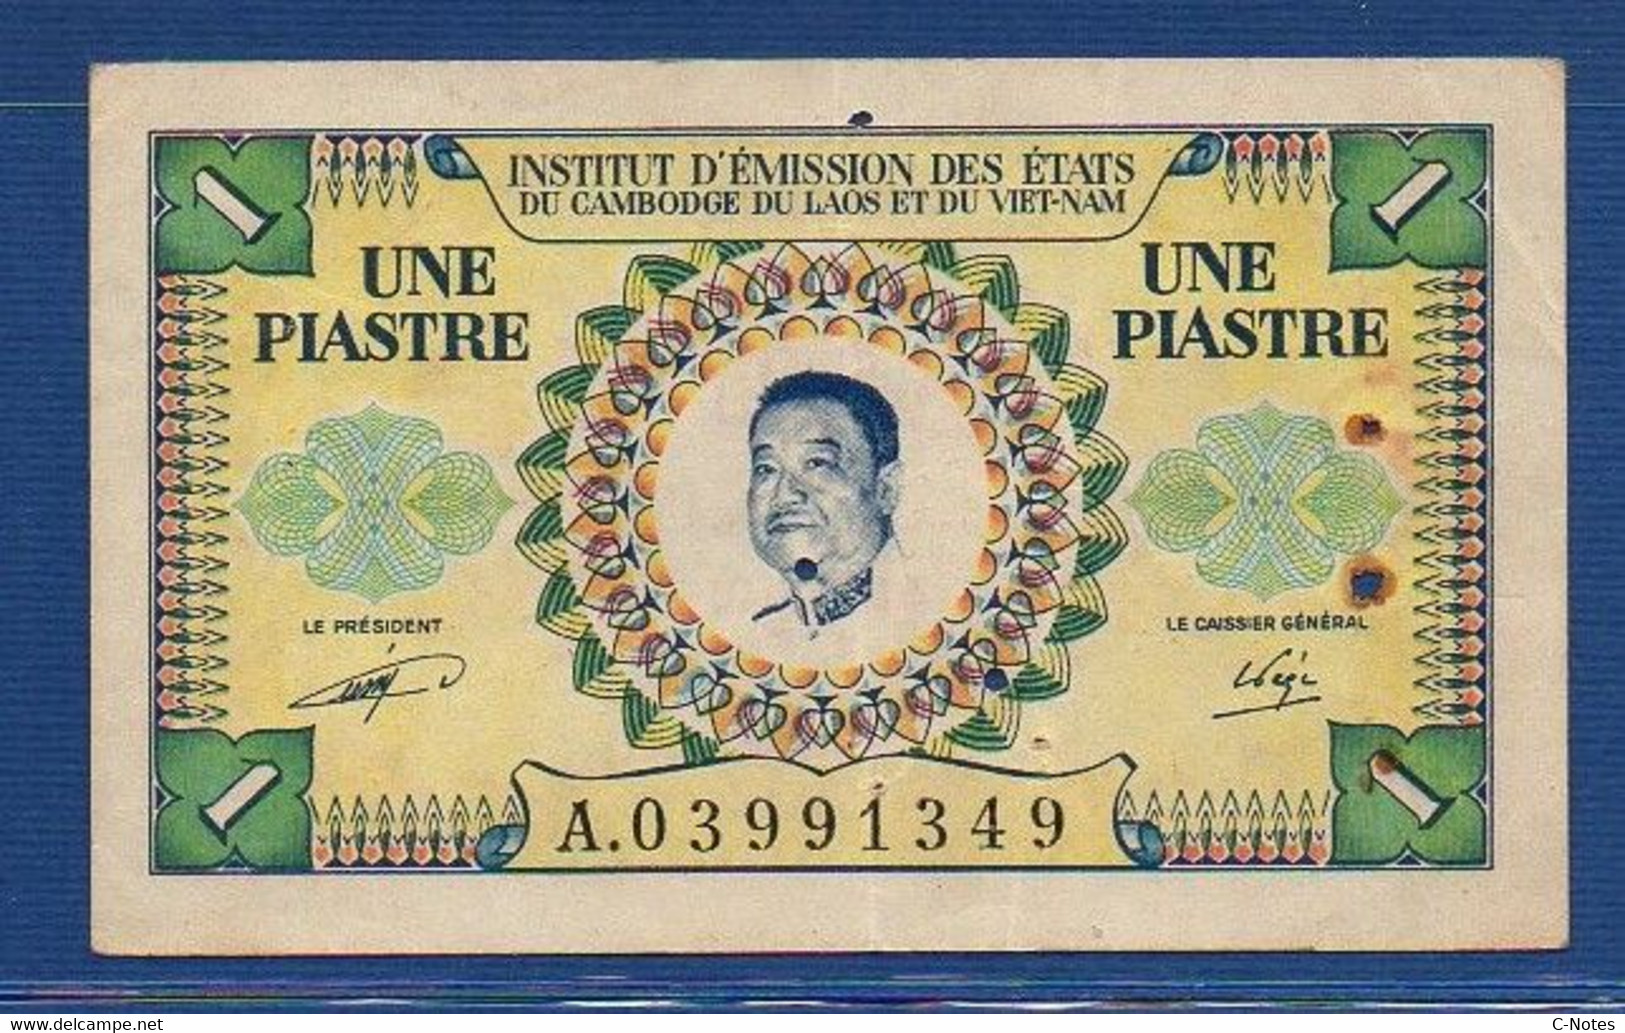 FRENCH INDOCHINA - P. 99 –  1 Piastre ND (1953) F/VF, S/n A.03991349 - Indochina